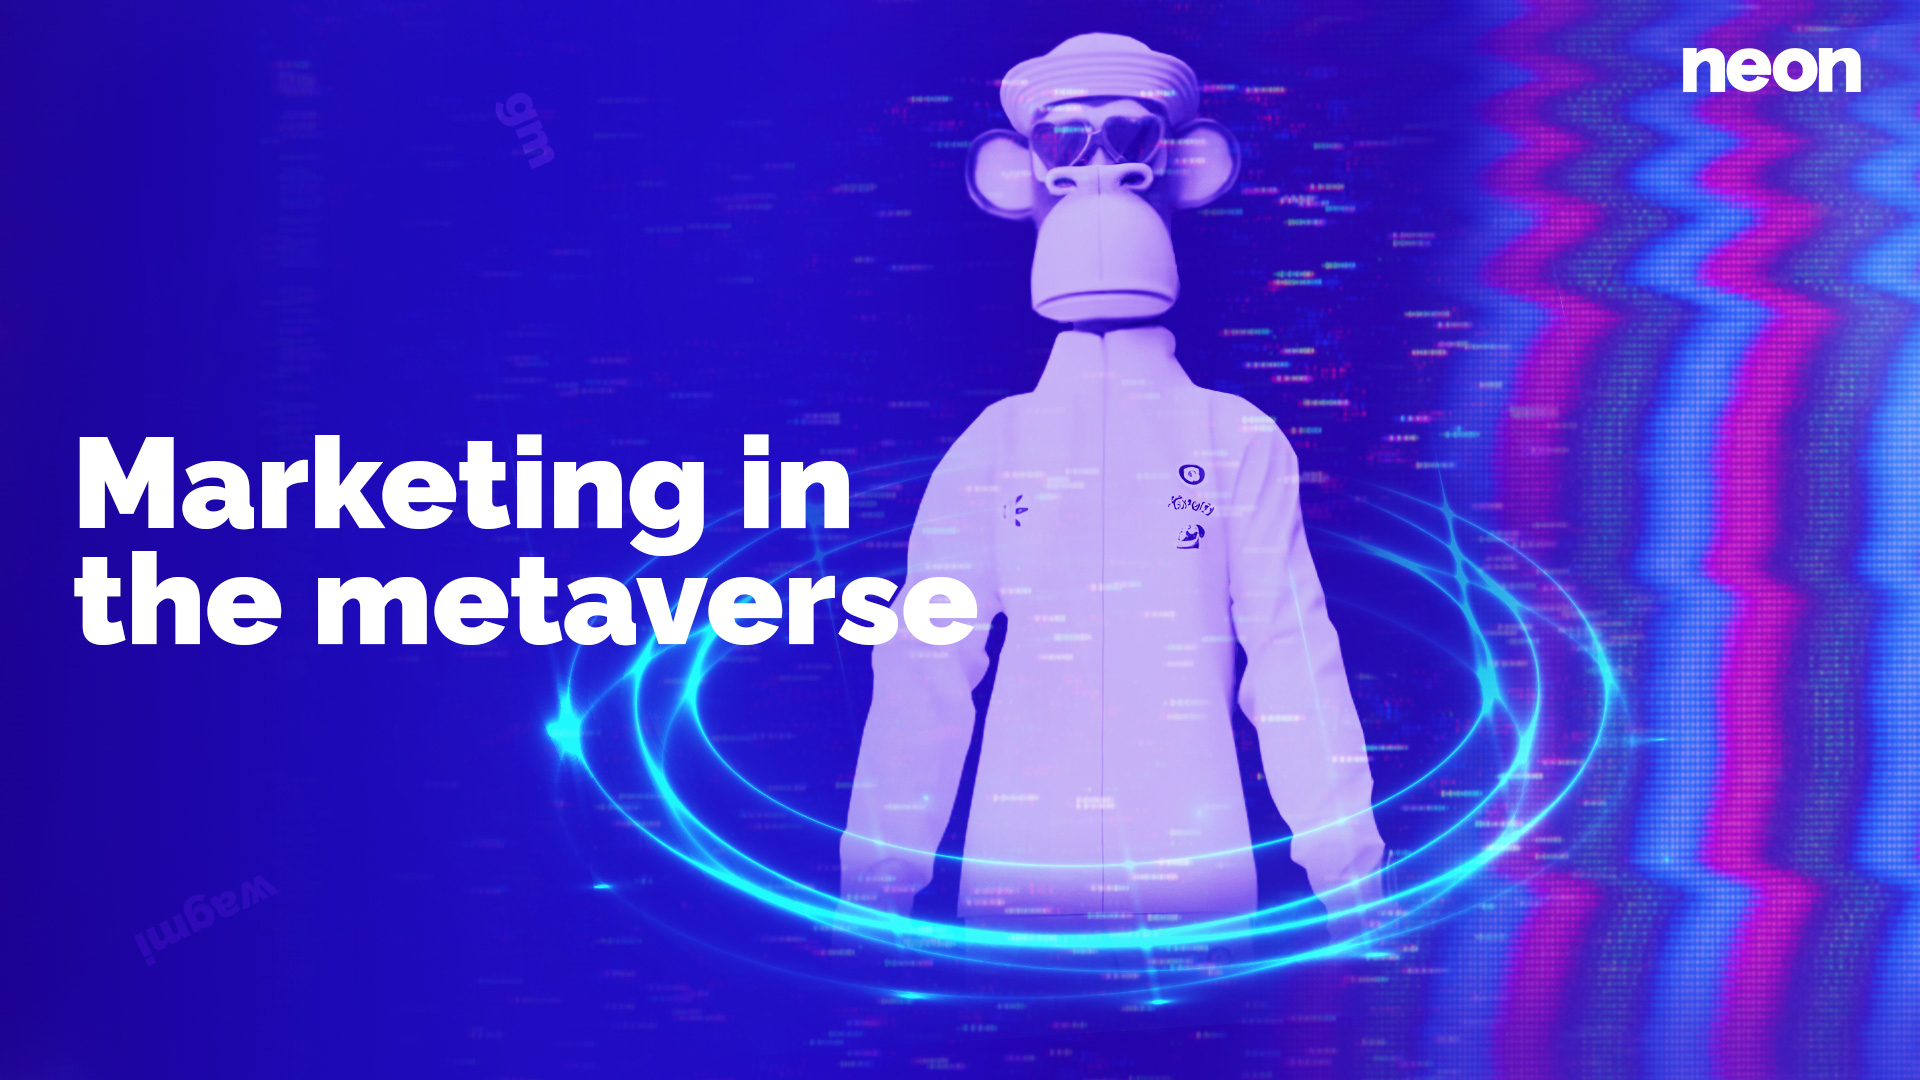 Guest Post by Trust Wallet: Will the Metaverse Replace the Internet?